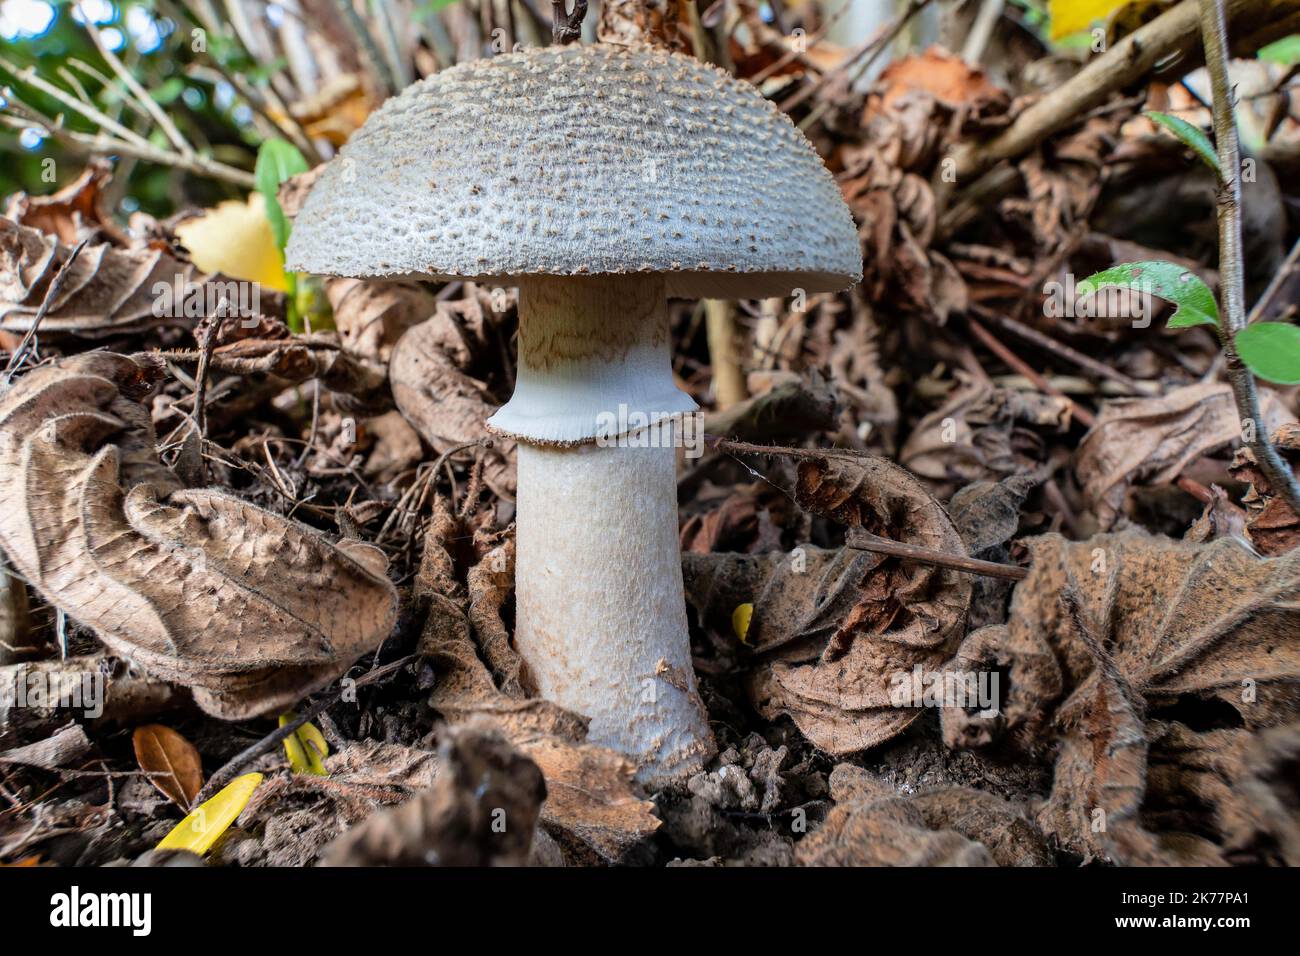 blusher (Amanita rubescens) in the woods Stock Photo